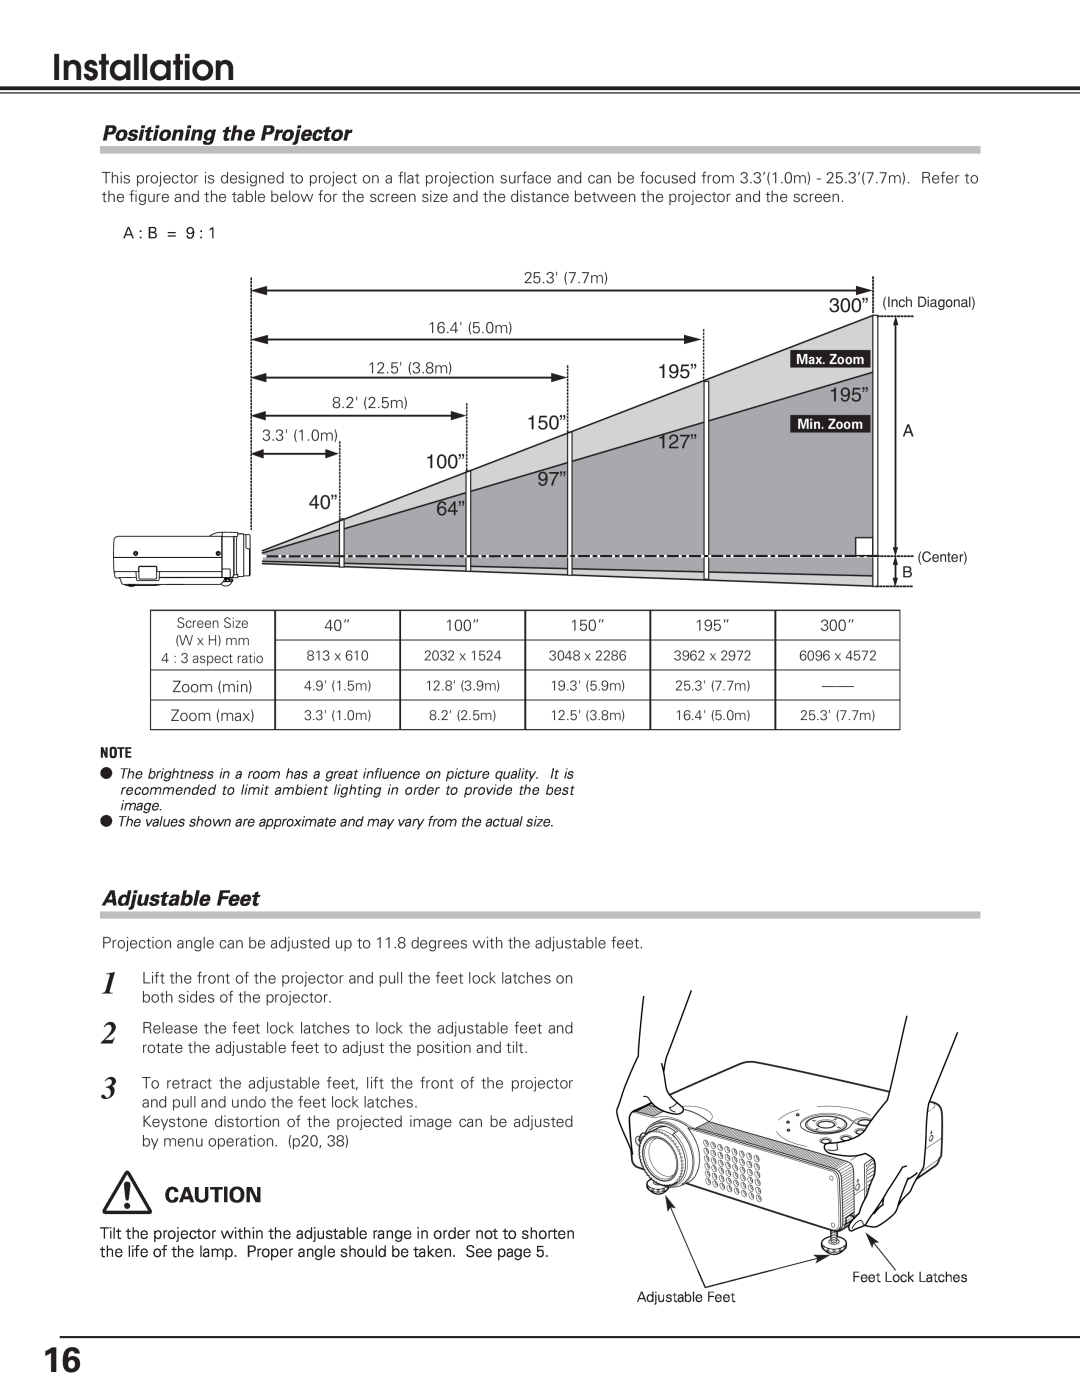 Sanyo PLC-SL20 owner manual Installation, Positioning the Projector, Adjustable Feet, 300”, 195”, 150”, 127”, 100” 